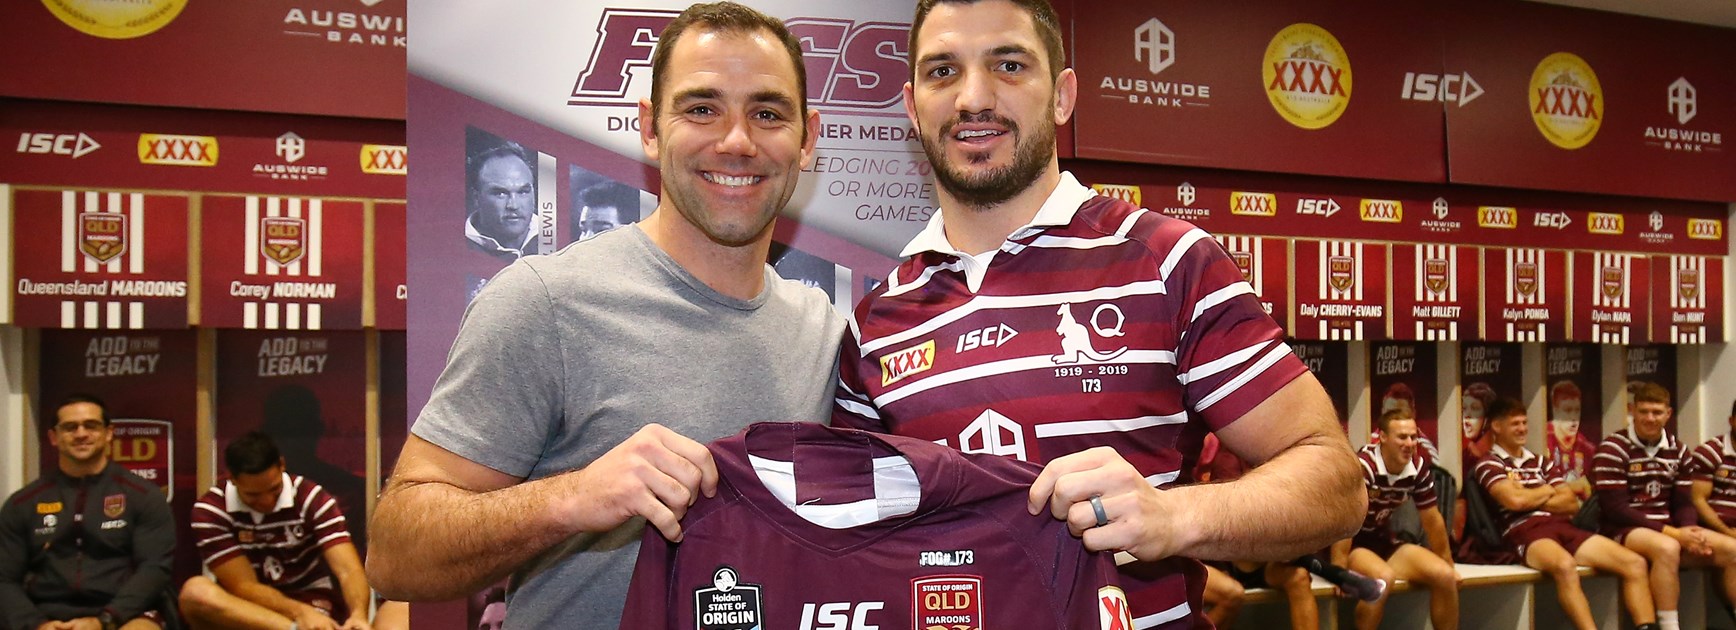 Smith presents Gillett with 20th Maroons jersey